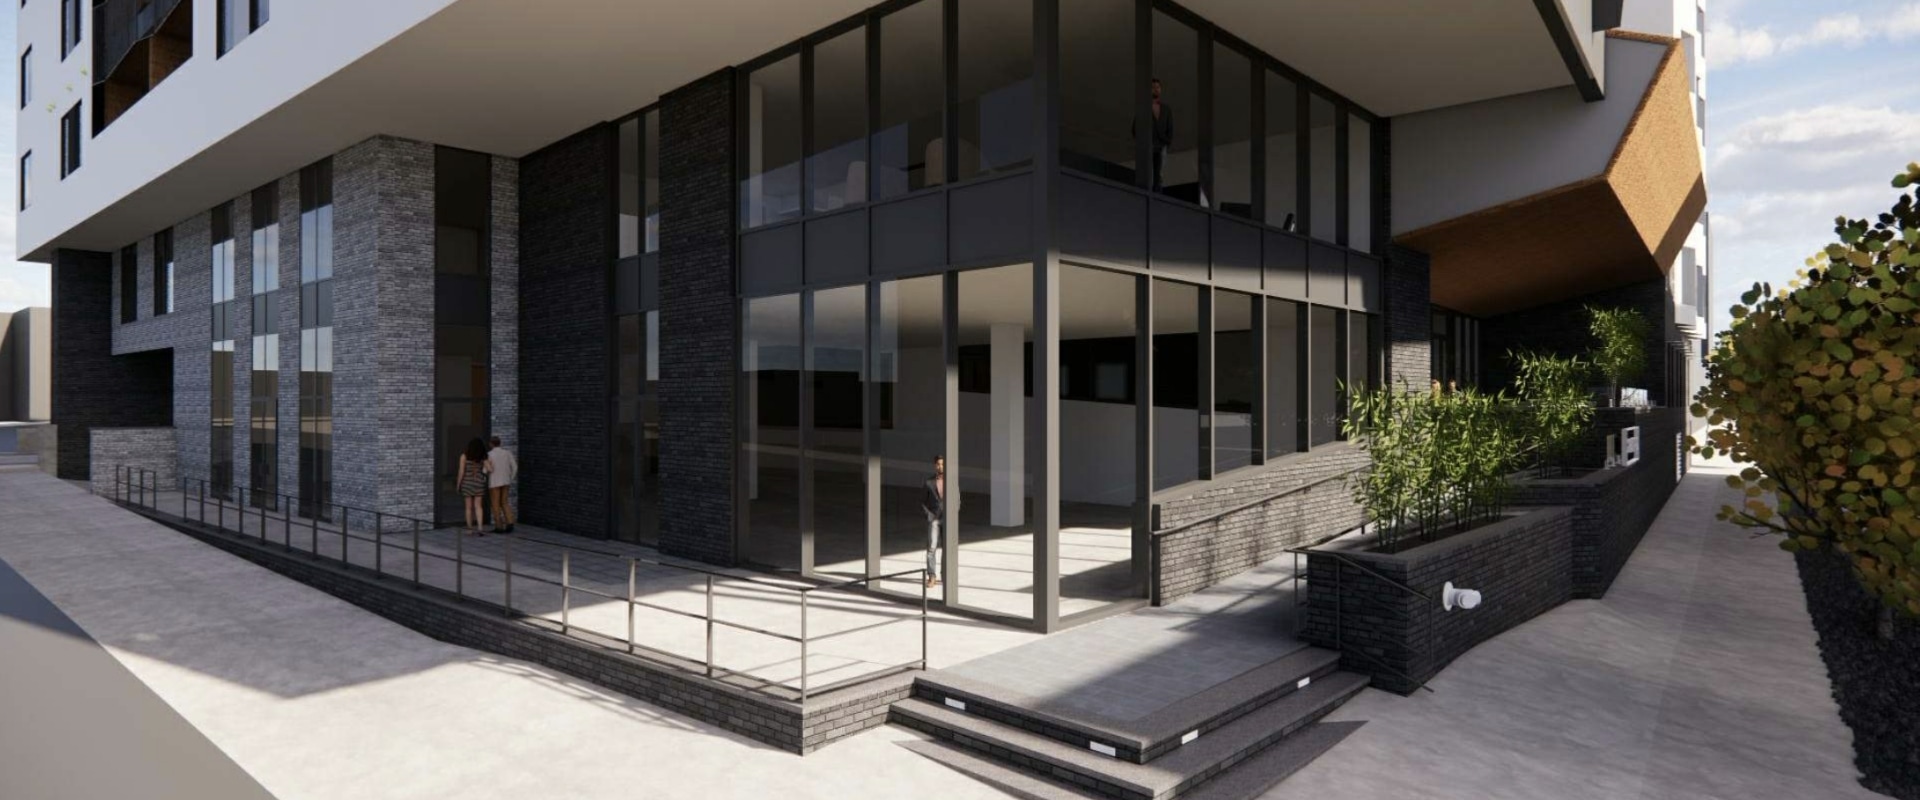 rendering of the entrance of the building